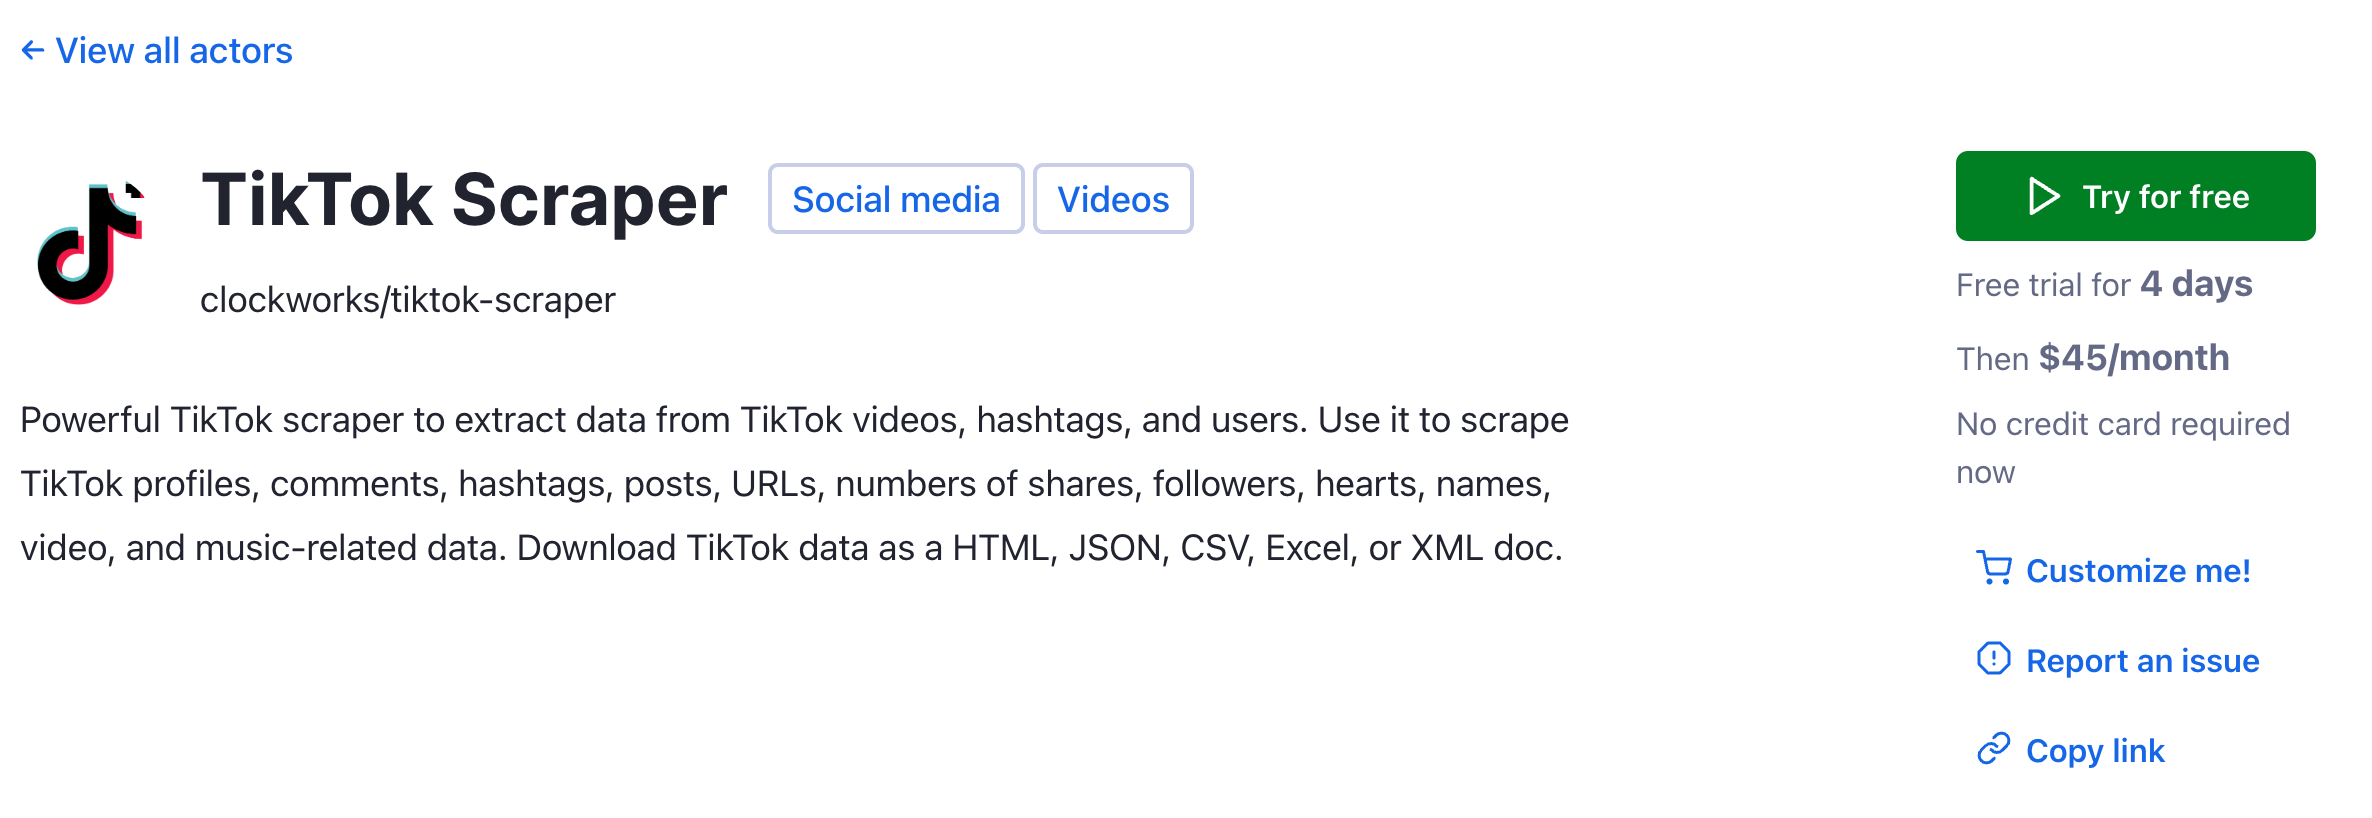 Step 1. Go to TikTok Scraper and click Try for free